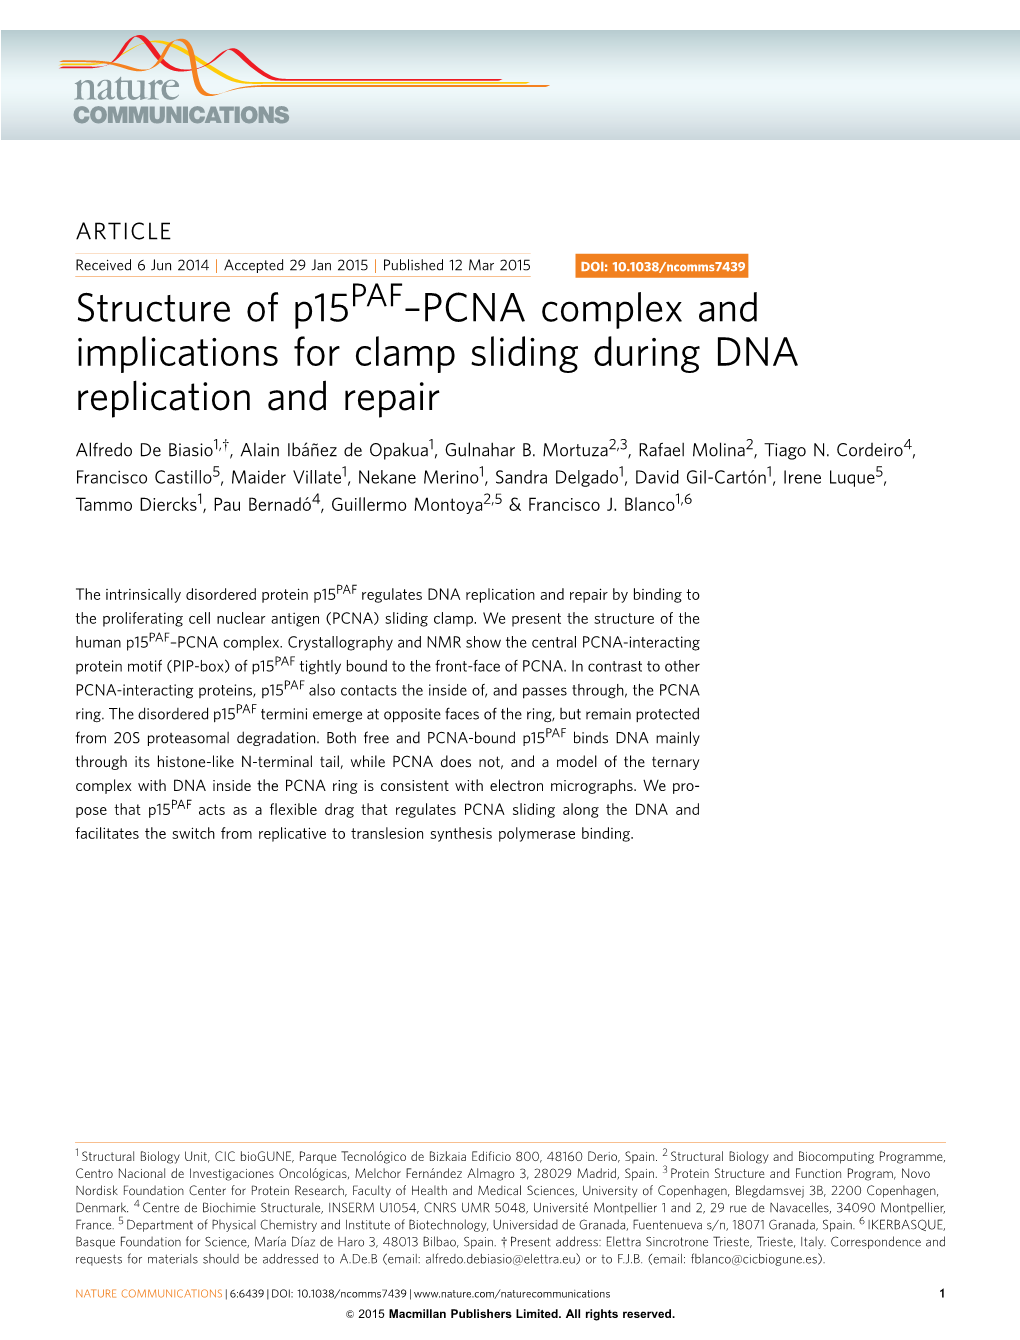 PCNA Complex and Implications for Clamp Sliding During DNA Replication and Repair